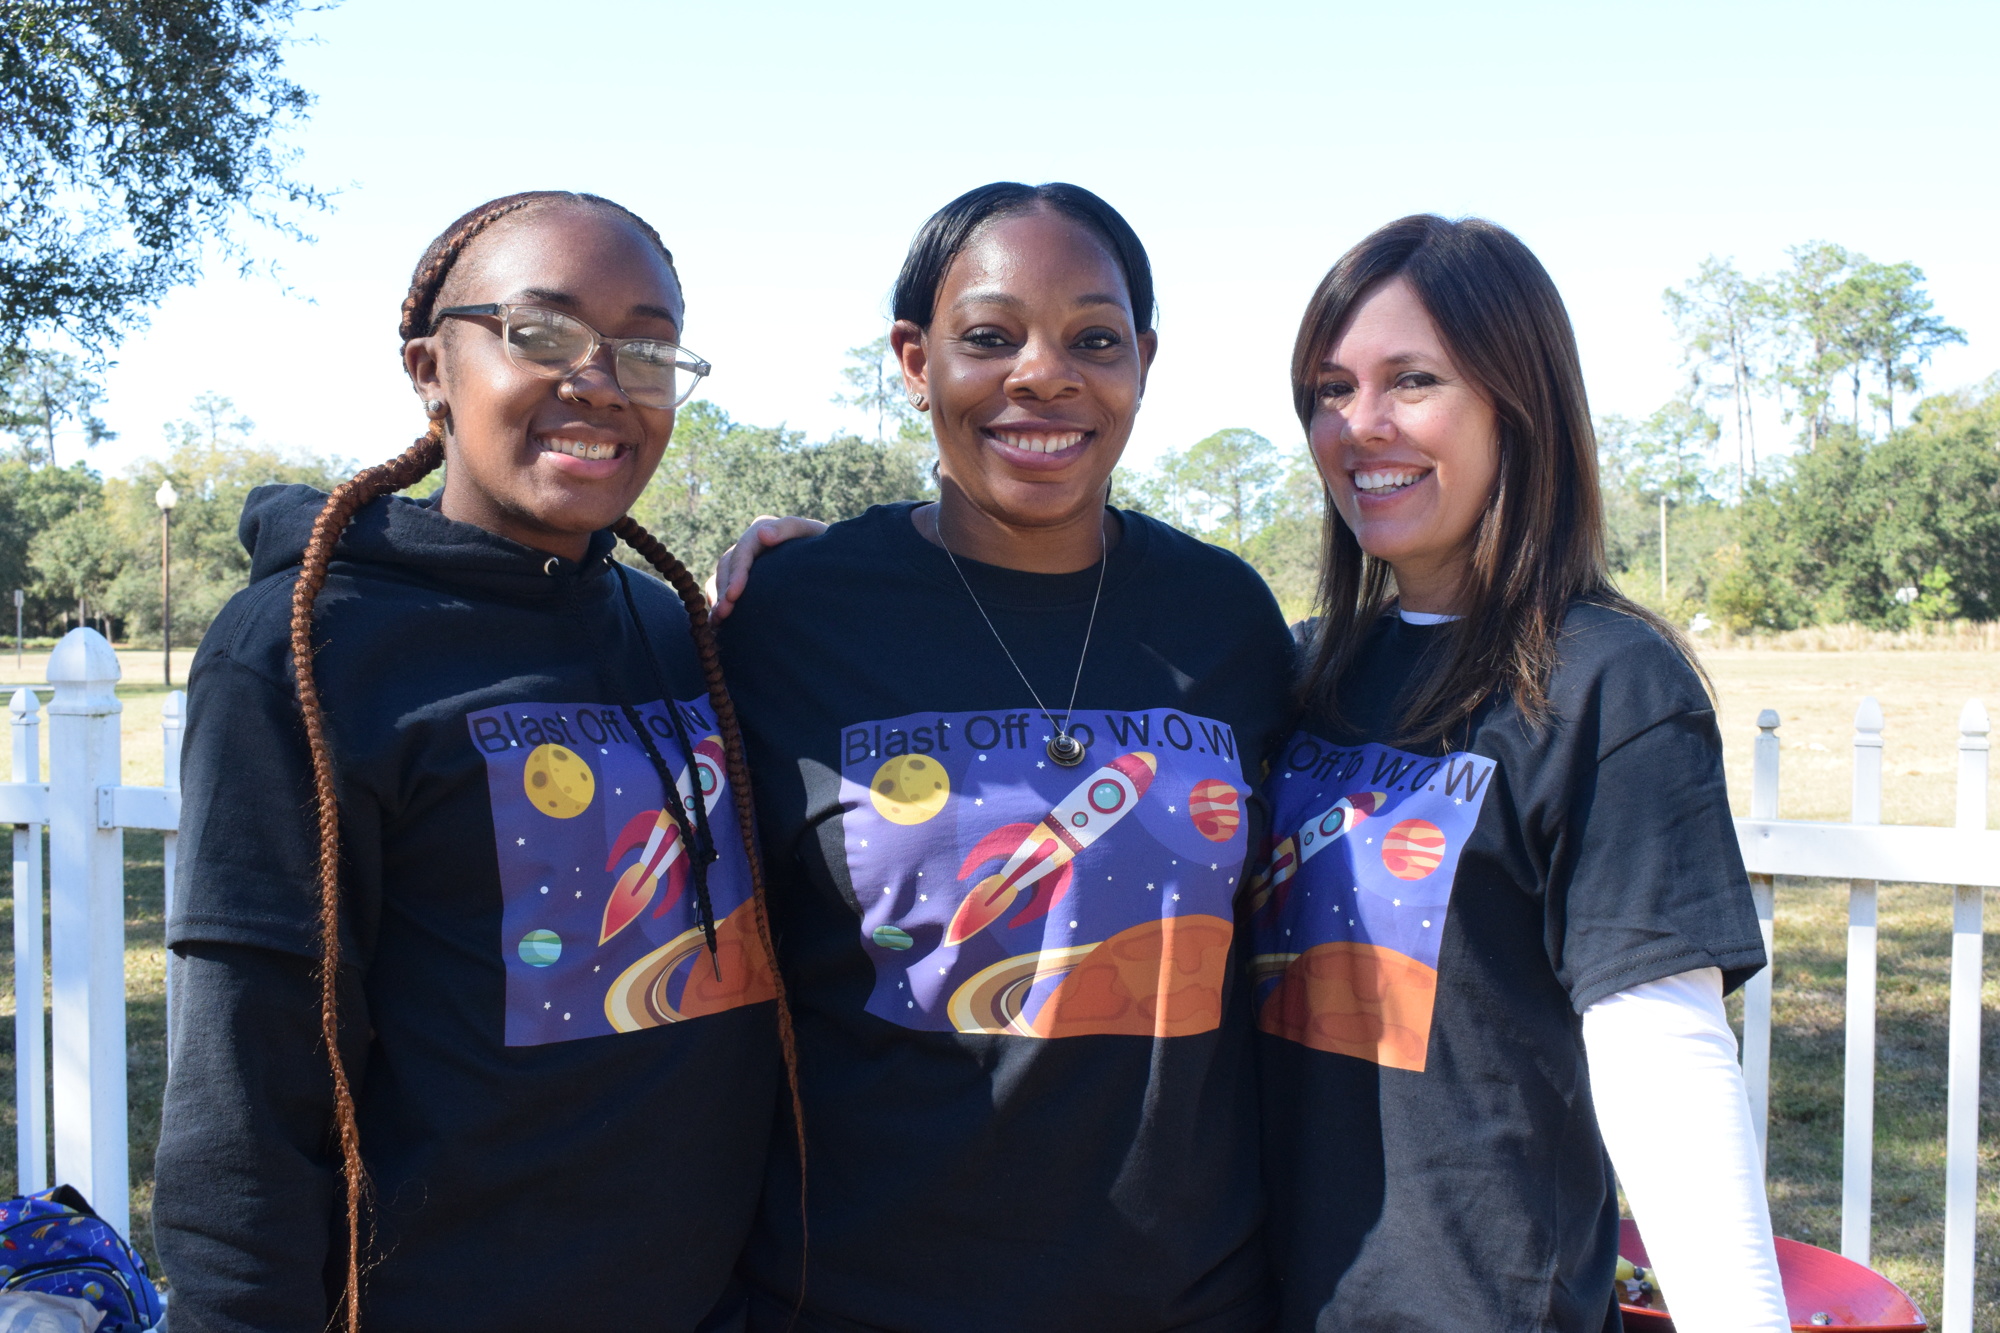 Kiajia Claxton, Shenicka Claxton and Heather Manley will lead World of Wonder Academy classes.